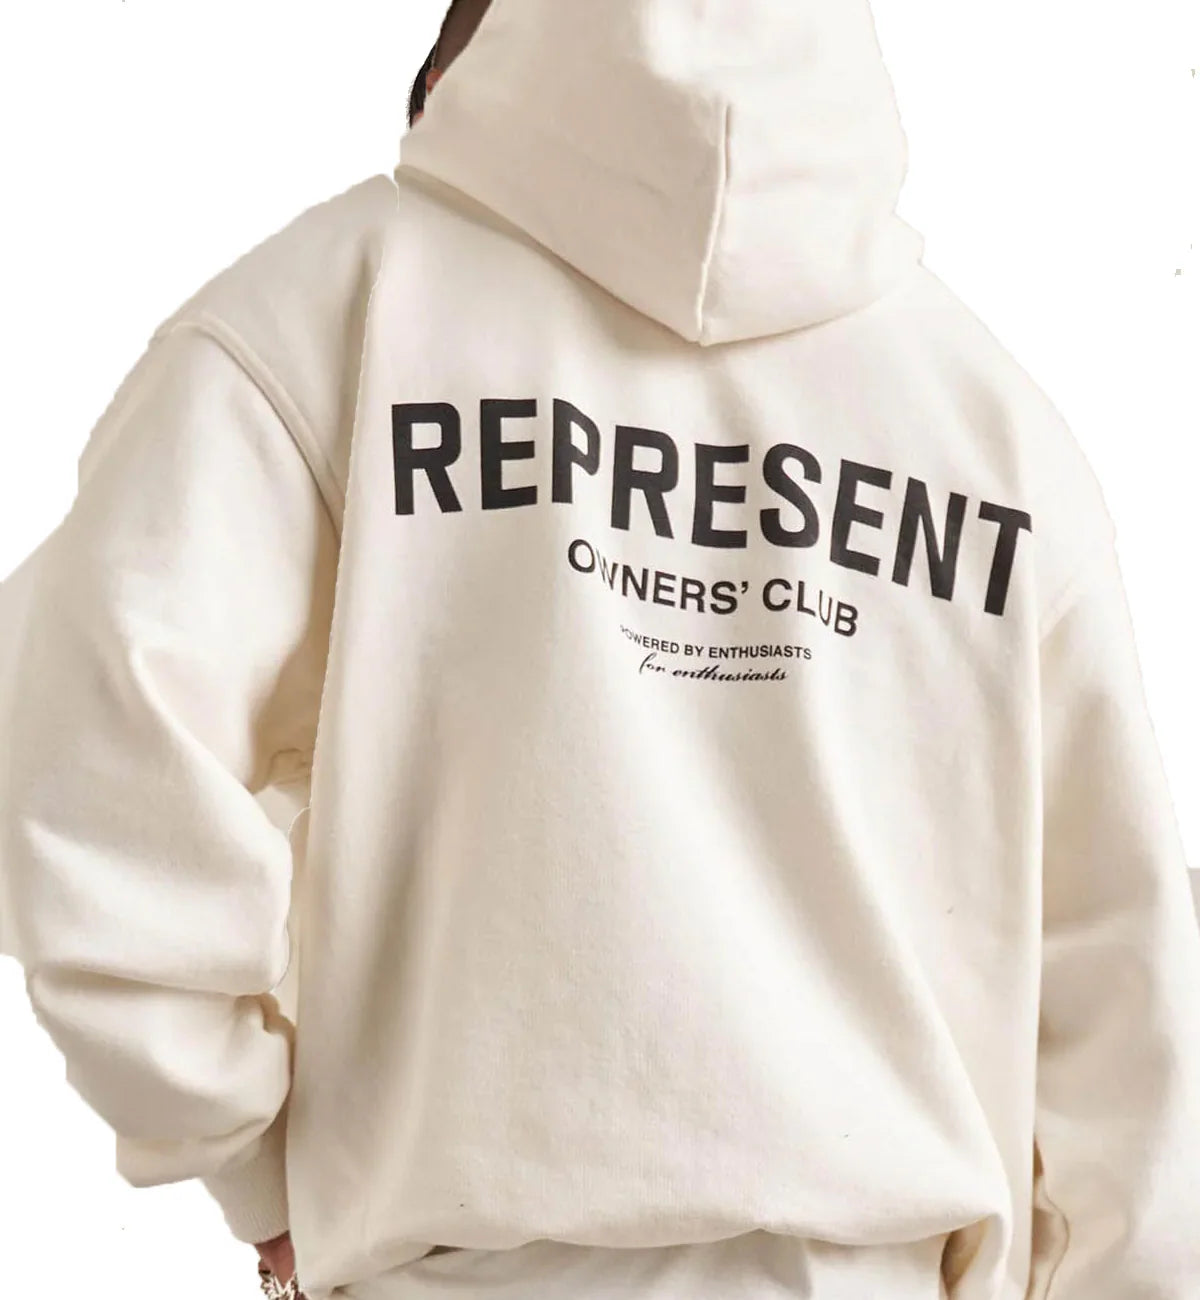 Represent Owners Club Hoodie White - OnSize